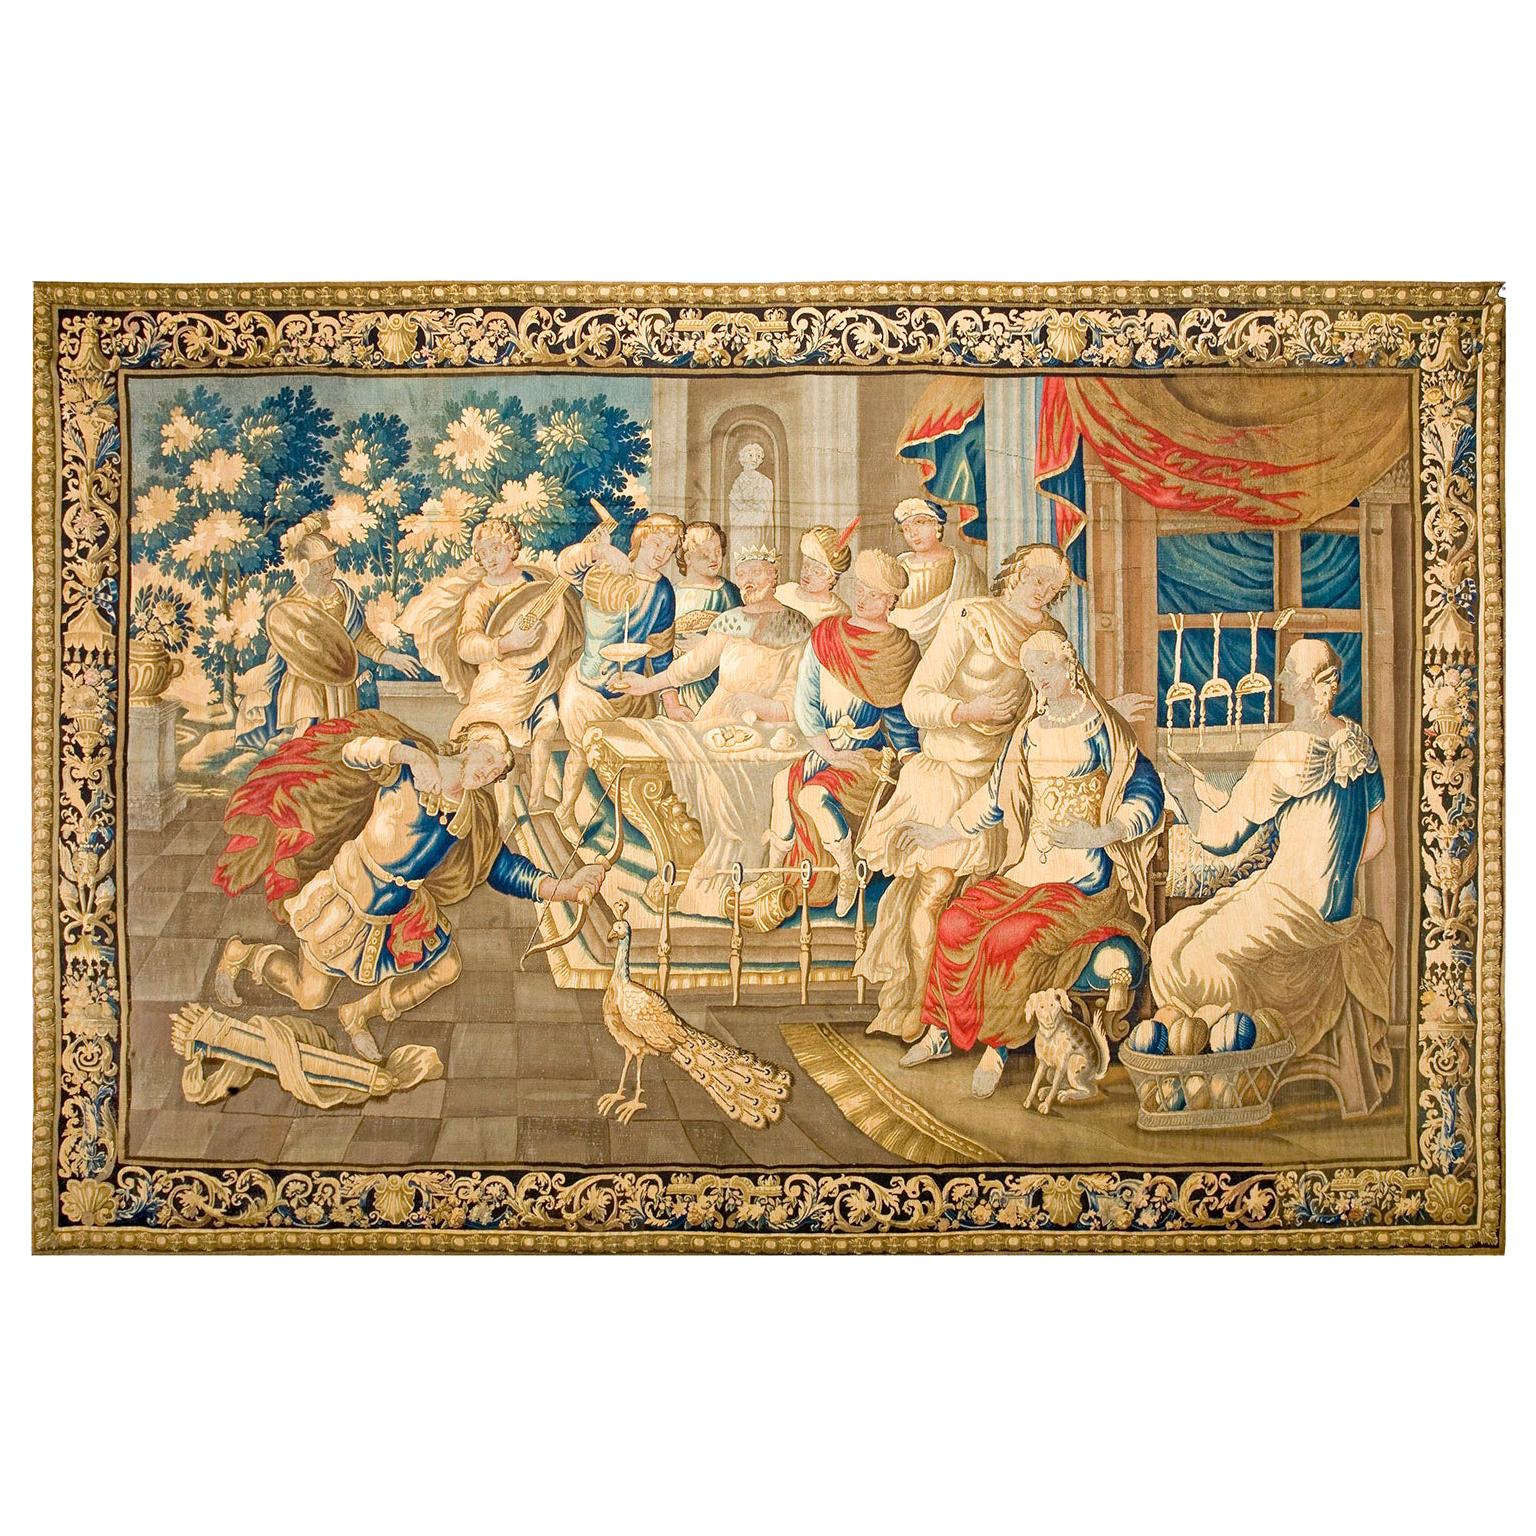 Mid 17th Century Brussels Tapestry ( 10'6" x 15'6" - 320 x 472 )